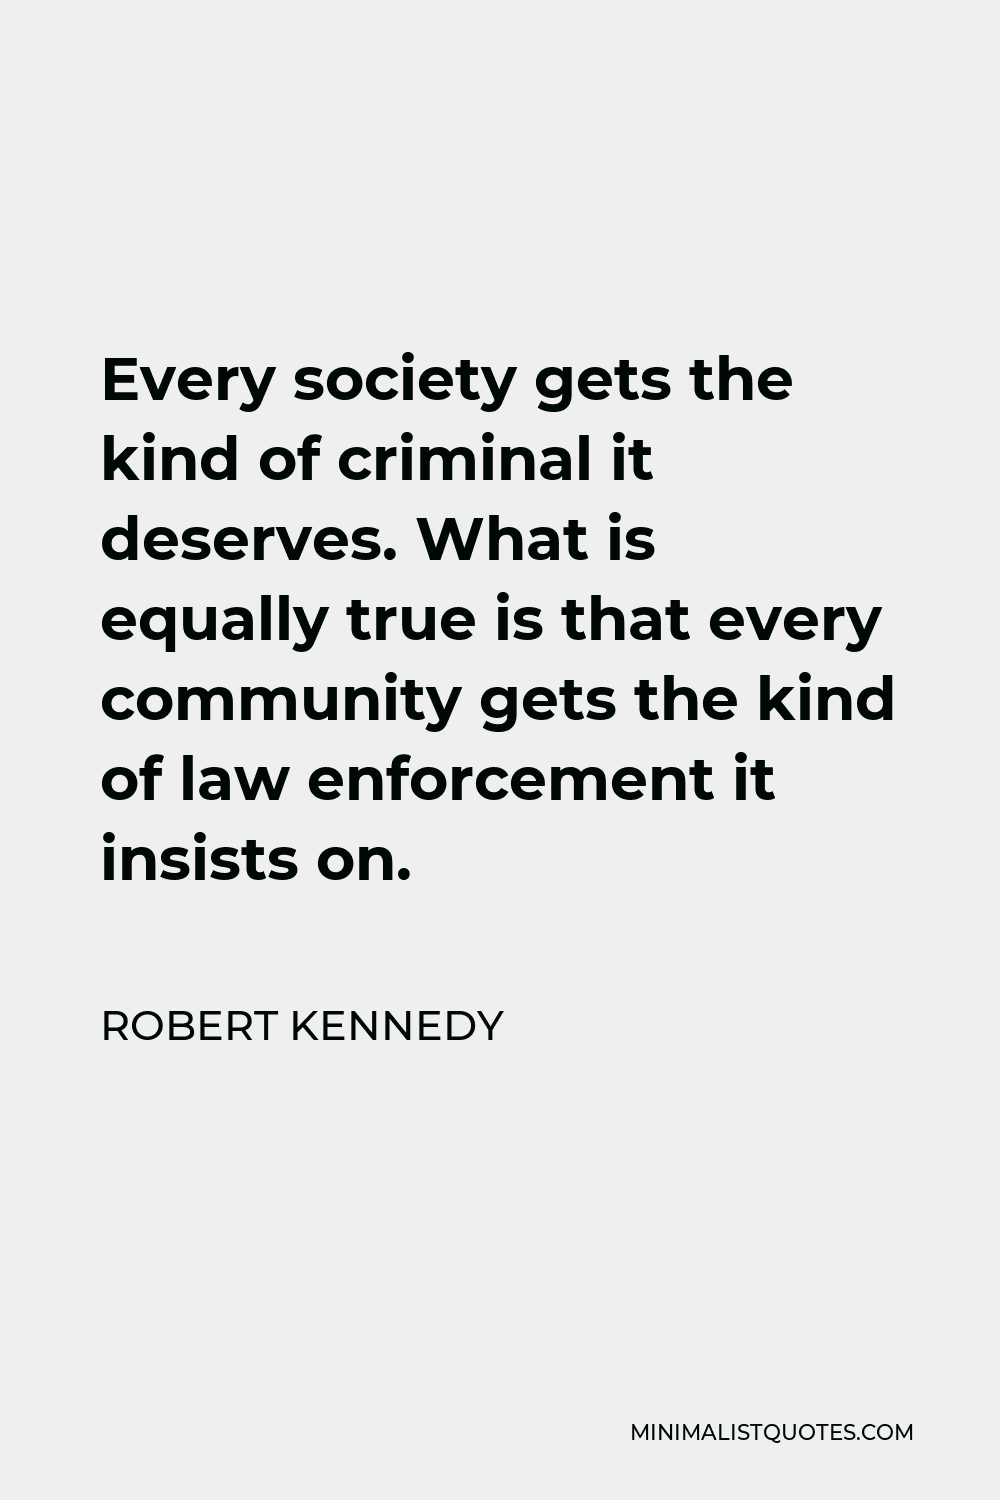 Robert Kennedy Quote - Every society gets the kind of criminal it deserves.